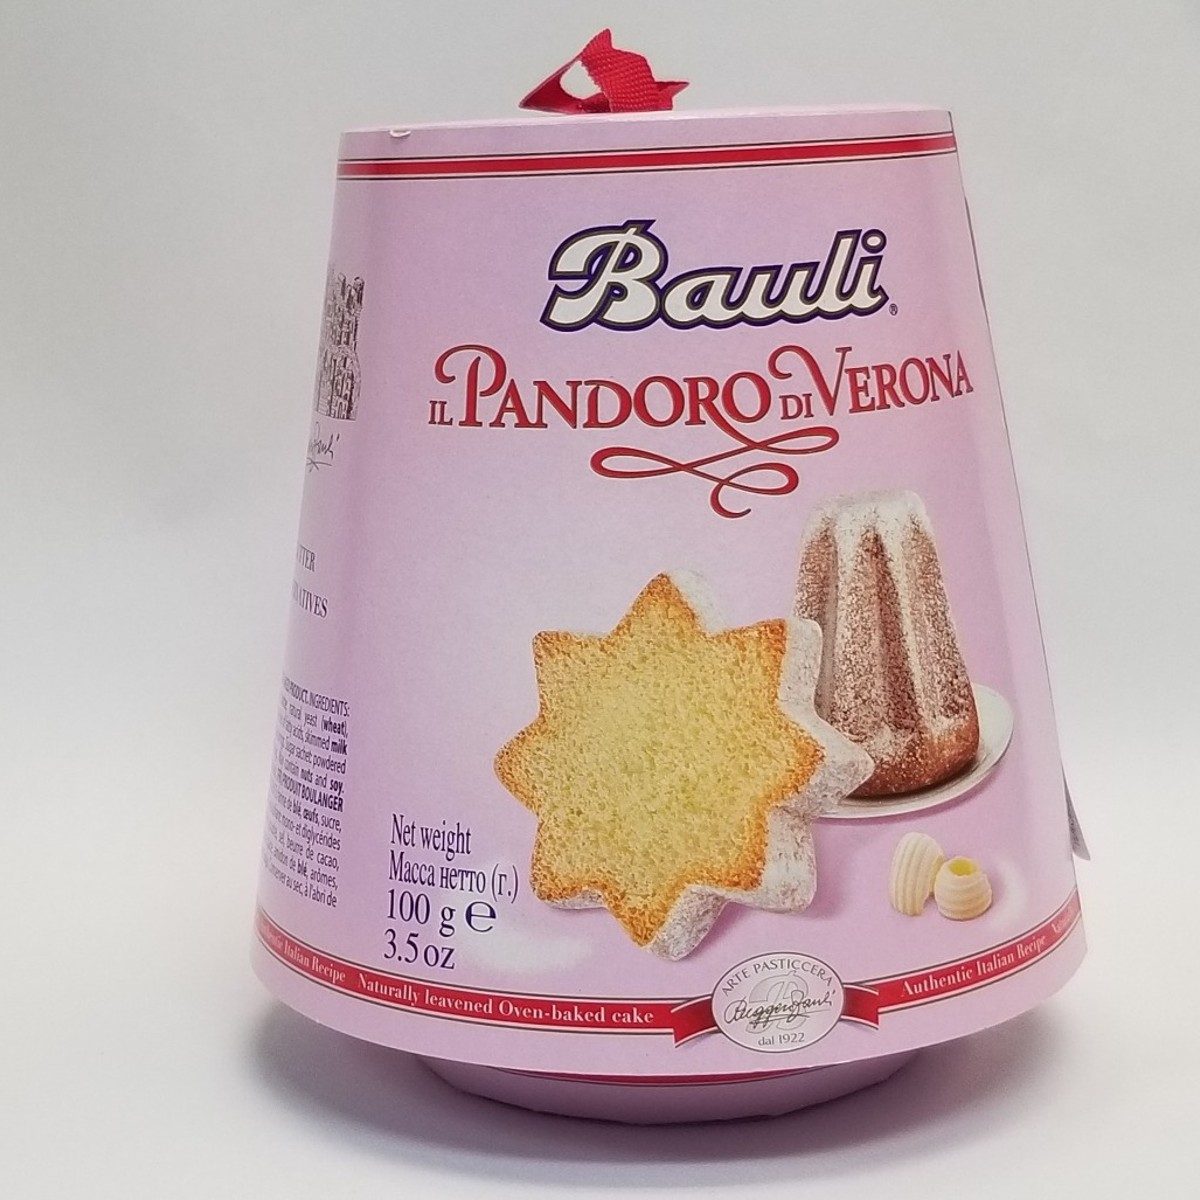 Tre Marie Il Pandoro 750g. Imported Holiday Cake, Made in Italy.